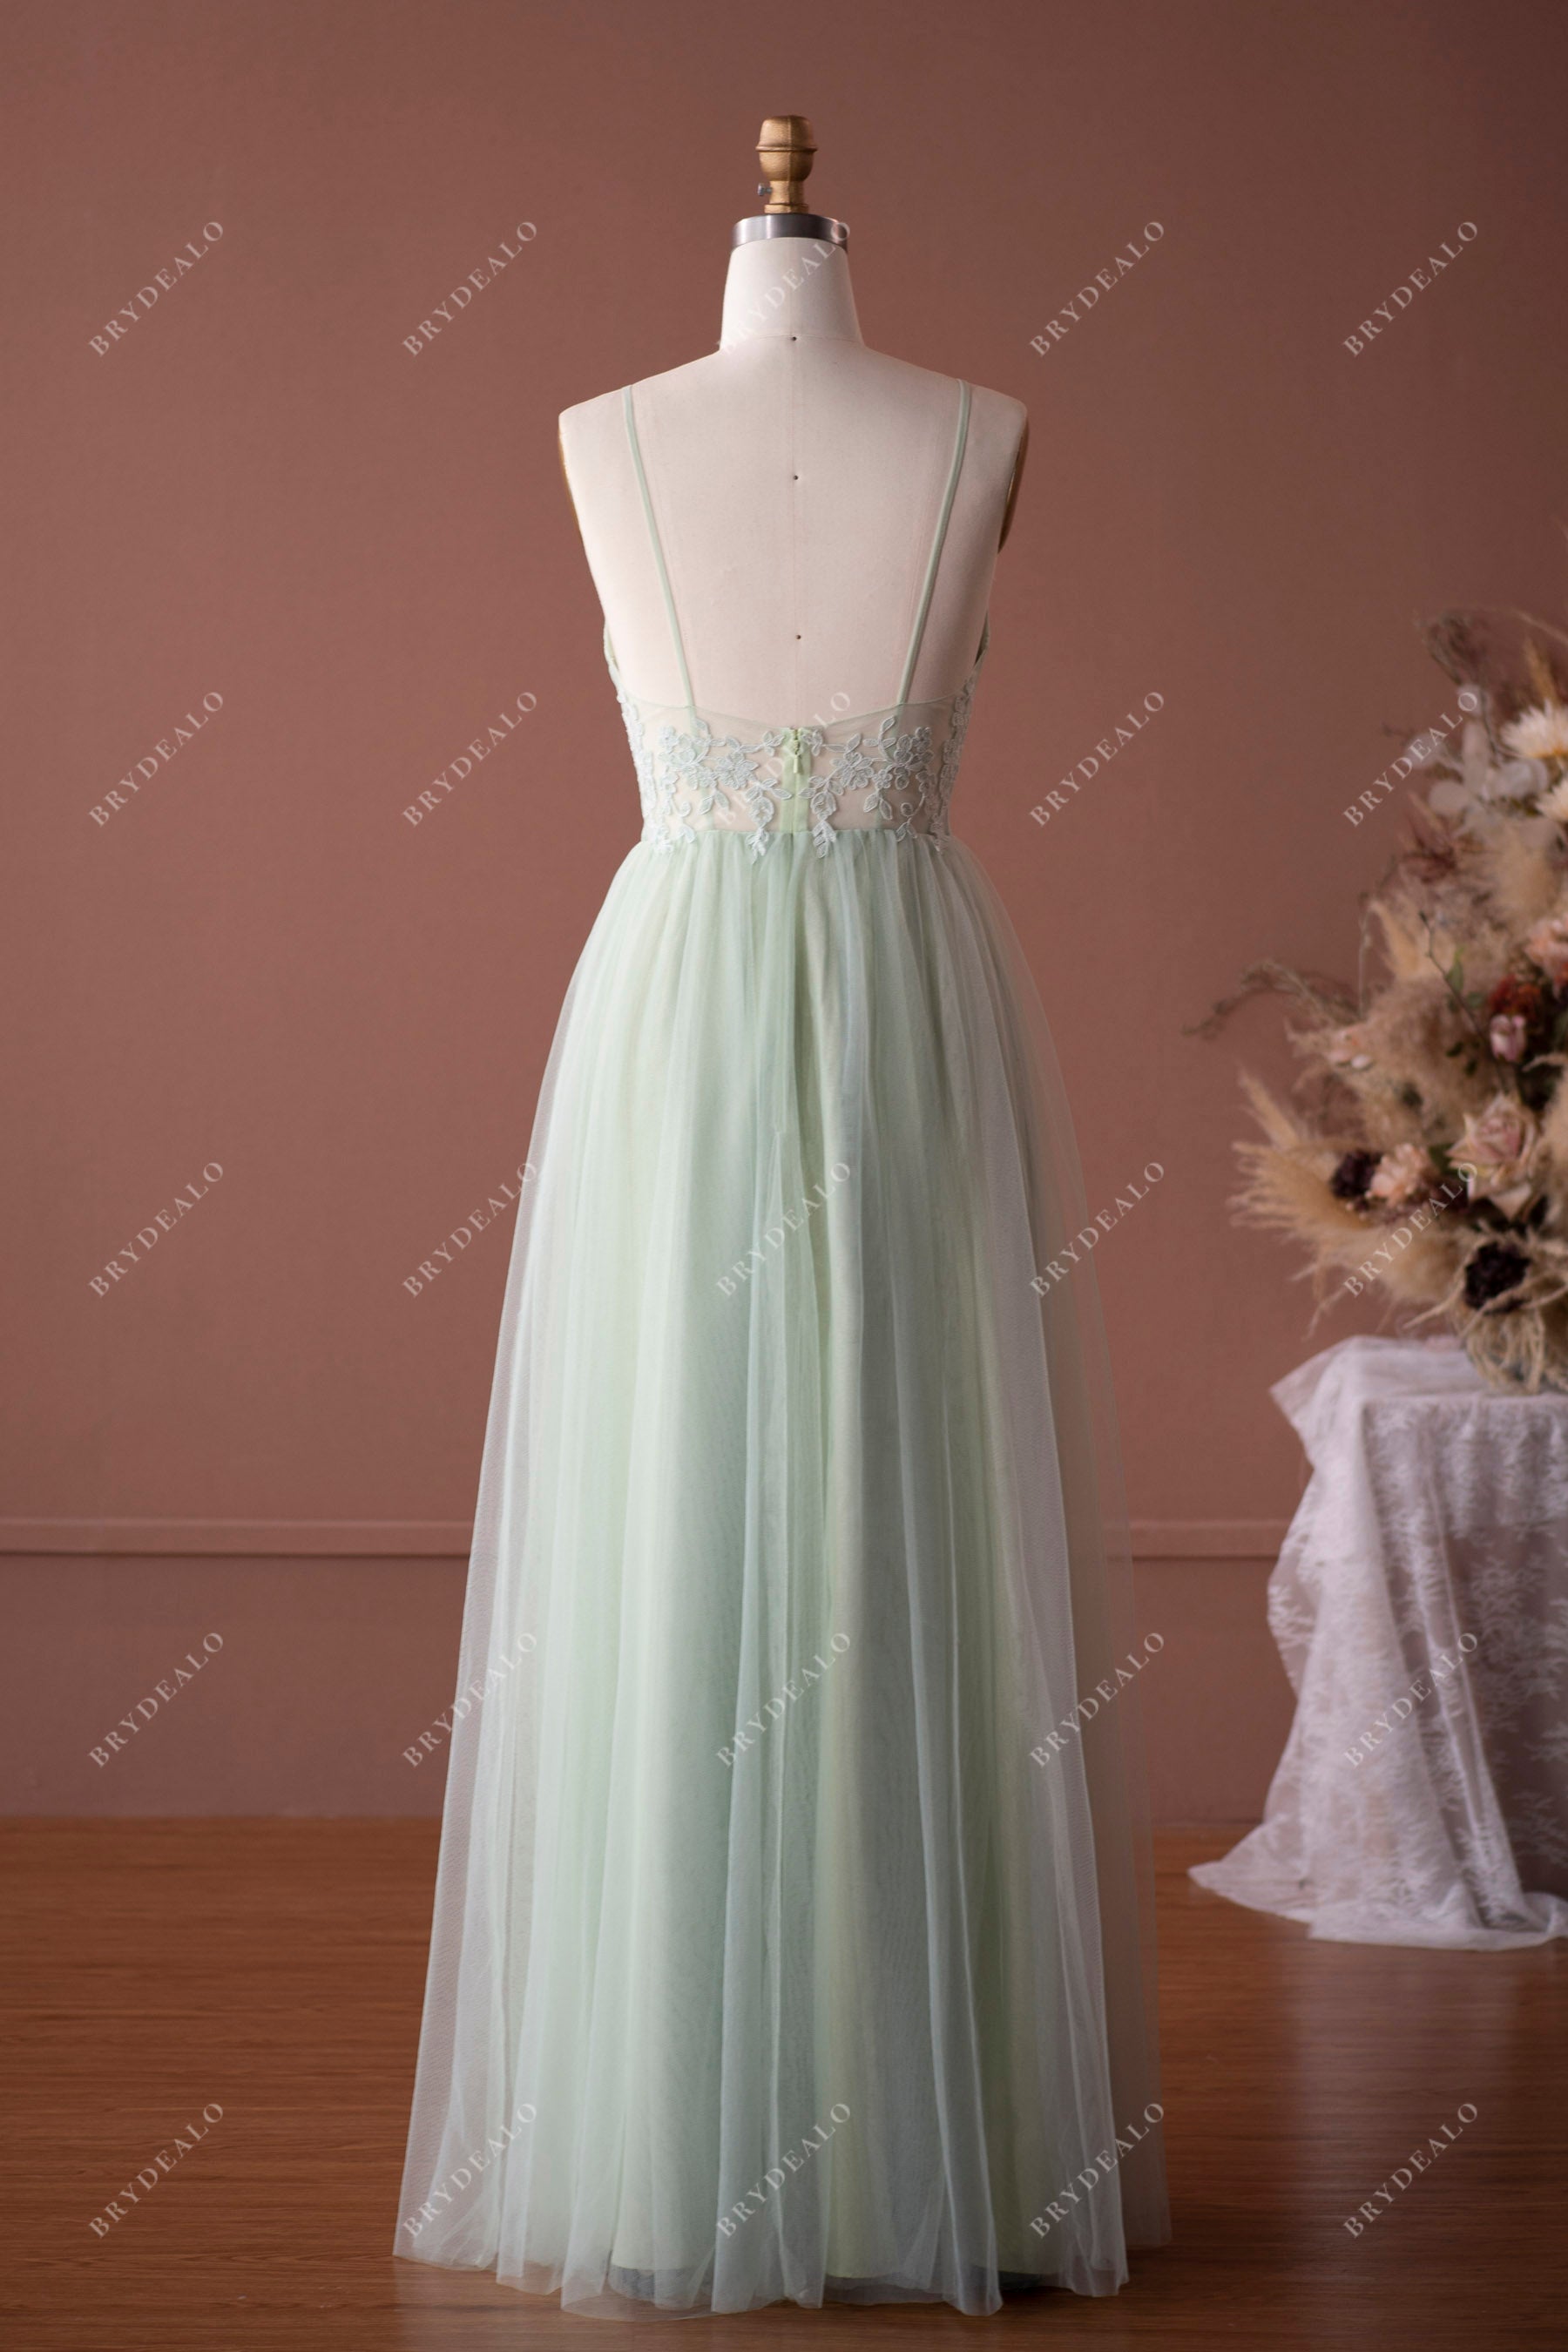 Mint Green Lace Tulle Thin Strap Bridesmaid Dress